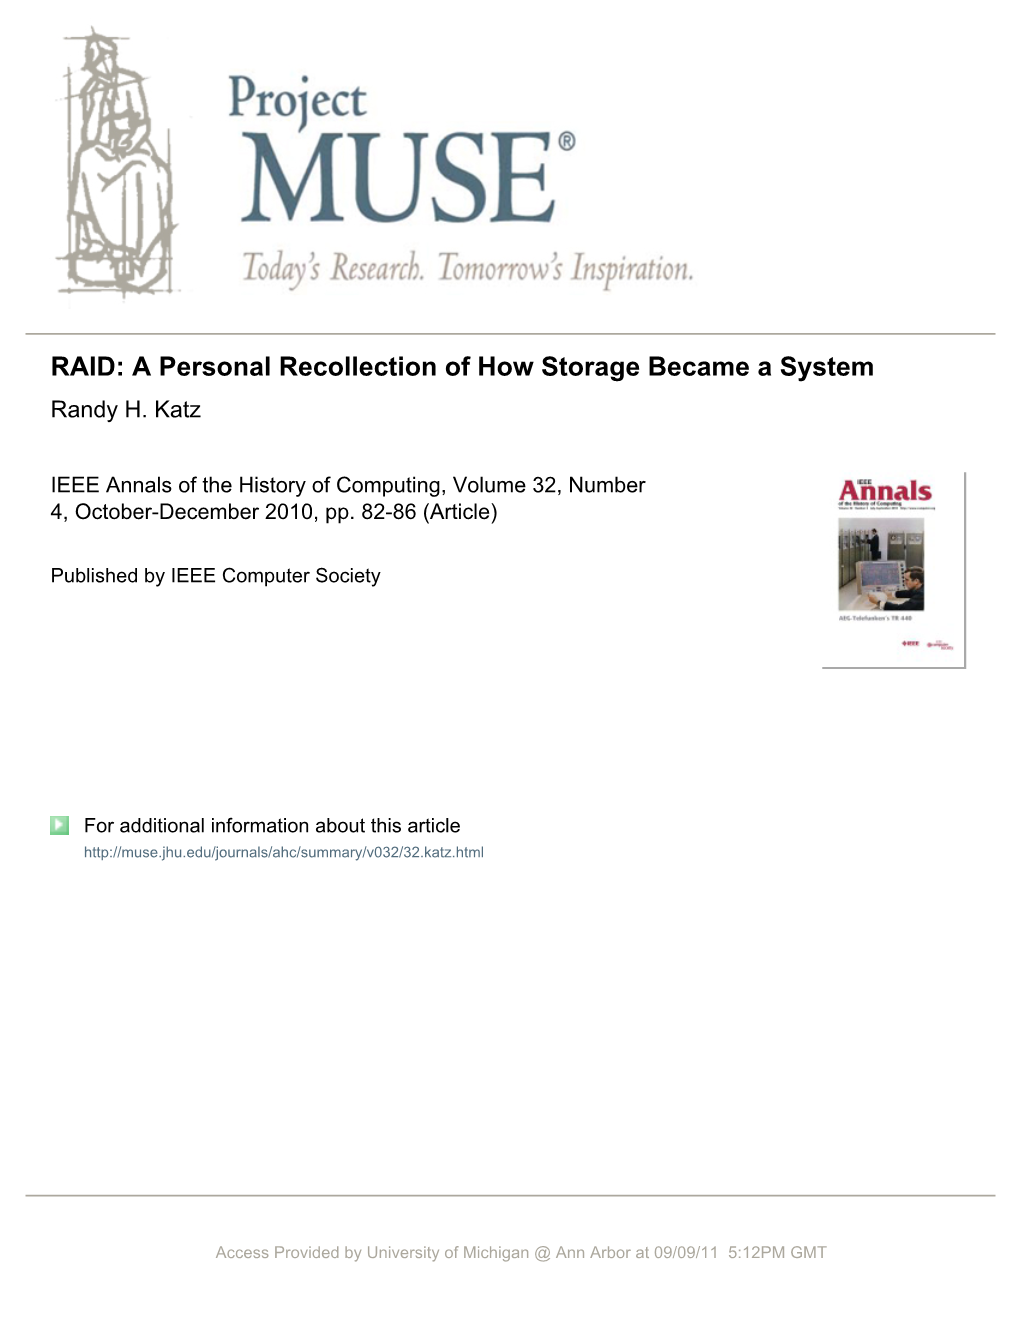 RAID: a Personal Recollection of How Storage Became a System Randy H